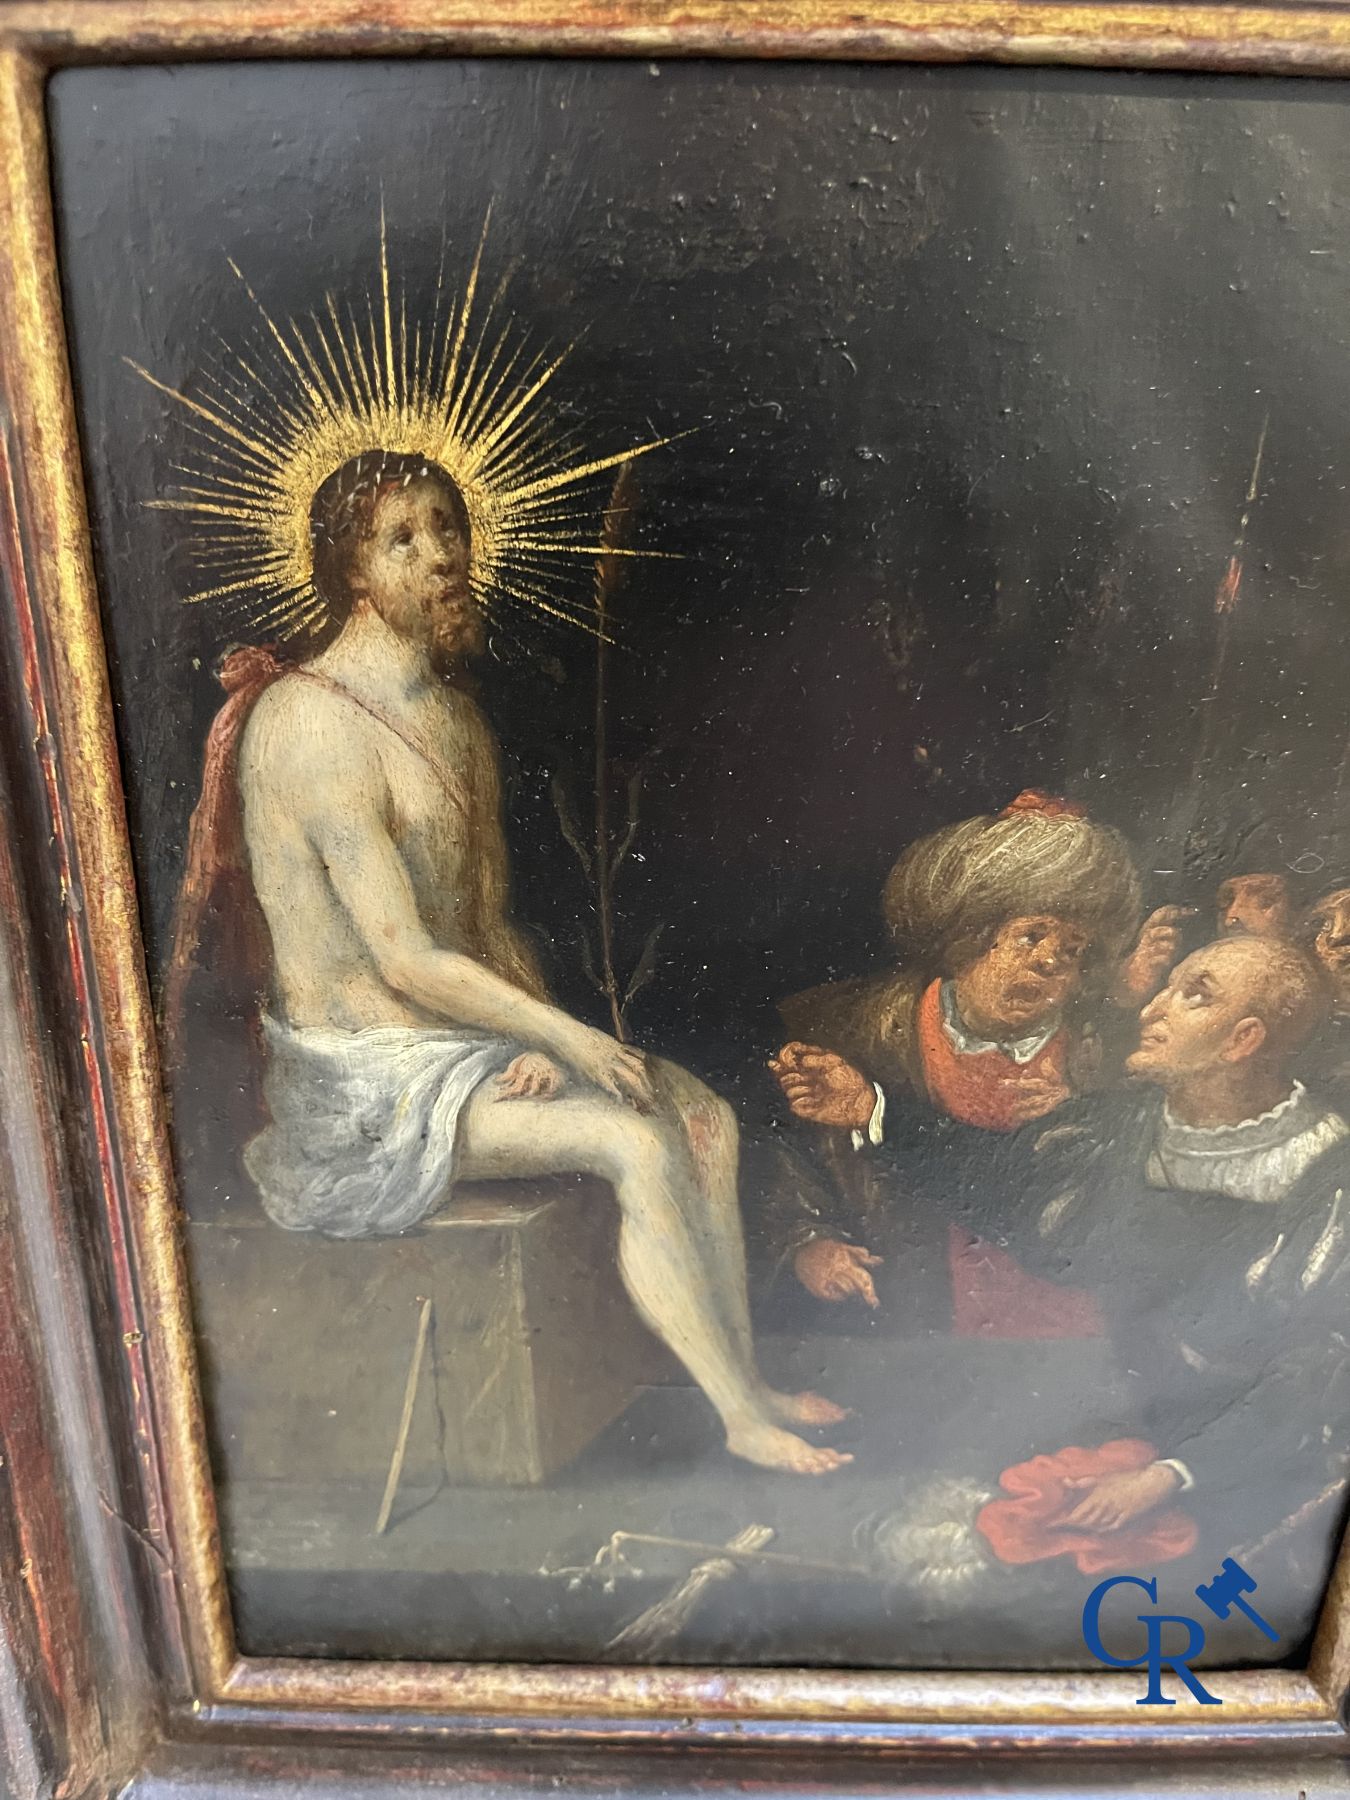 Painting: Antwerp, 16th century. The mockery of Christ. - Image 6 of 11